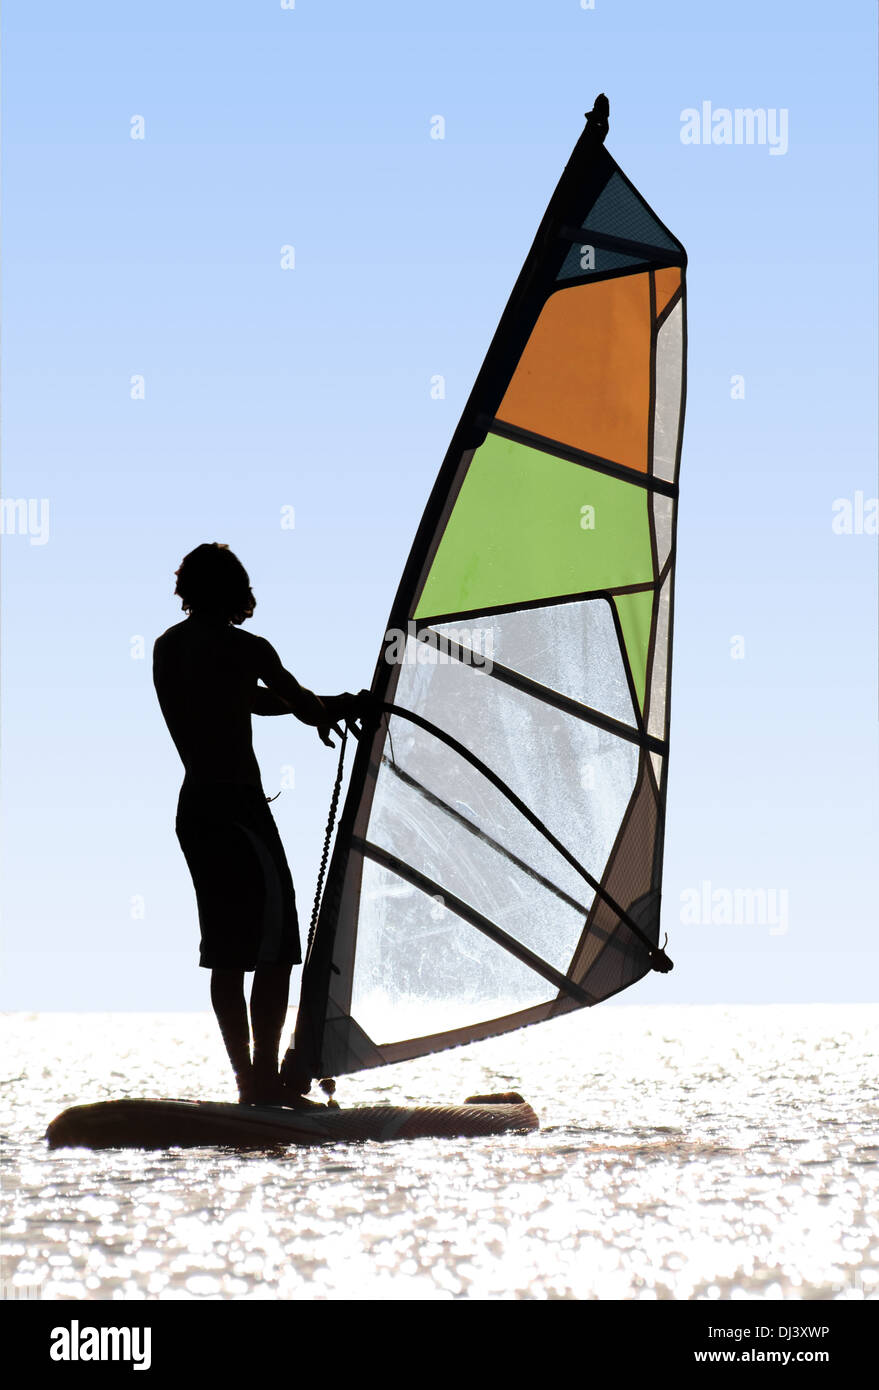 Silhouette of a windsurfer on waves of a bay Stock Photo